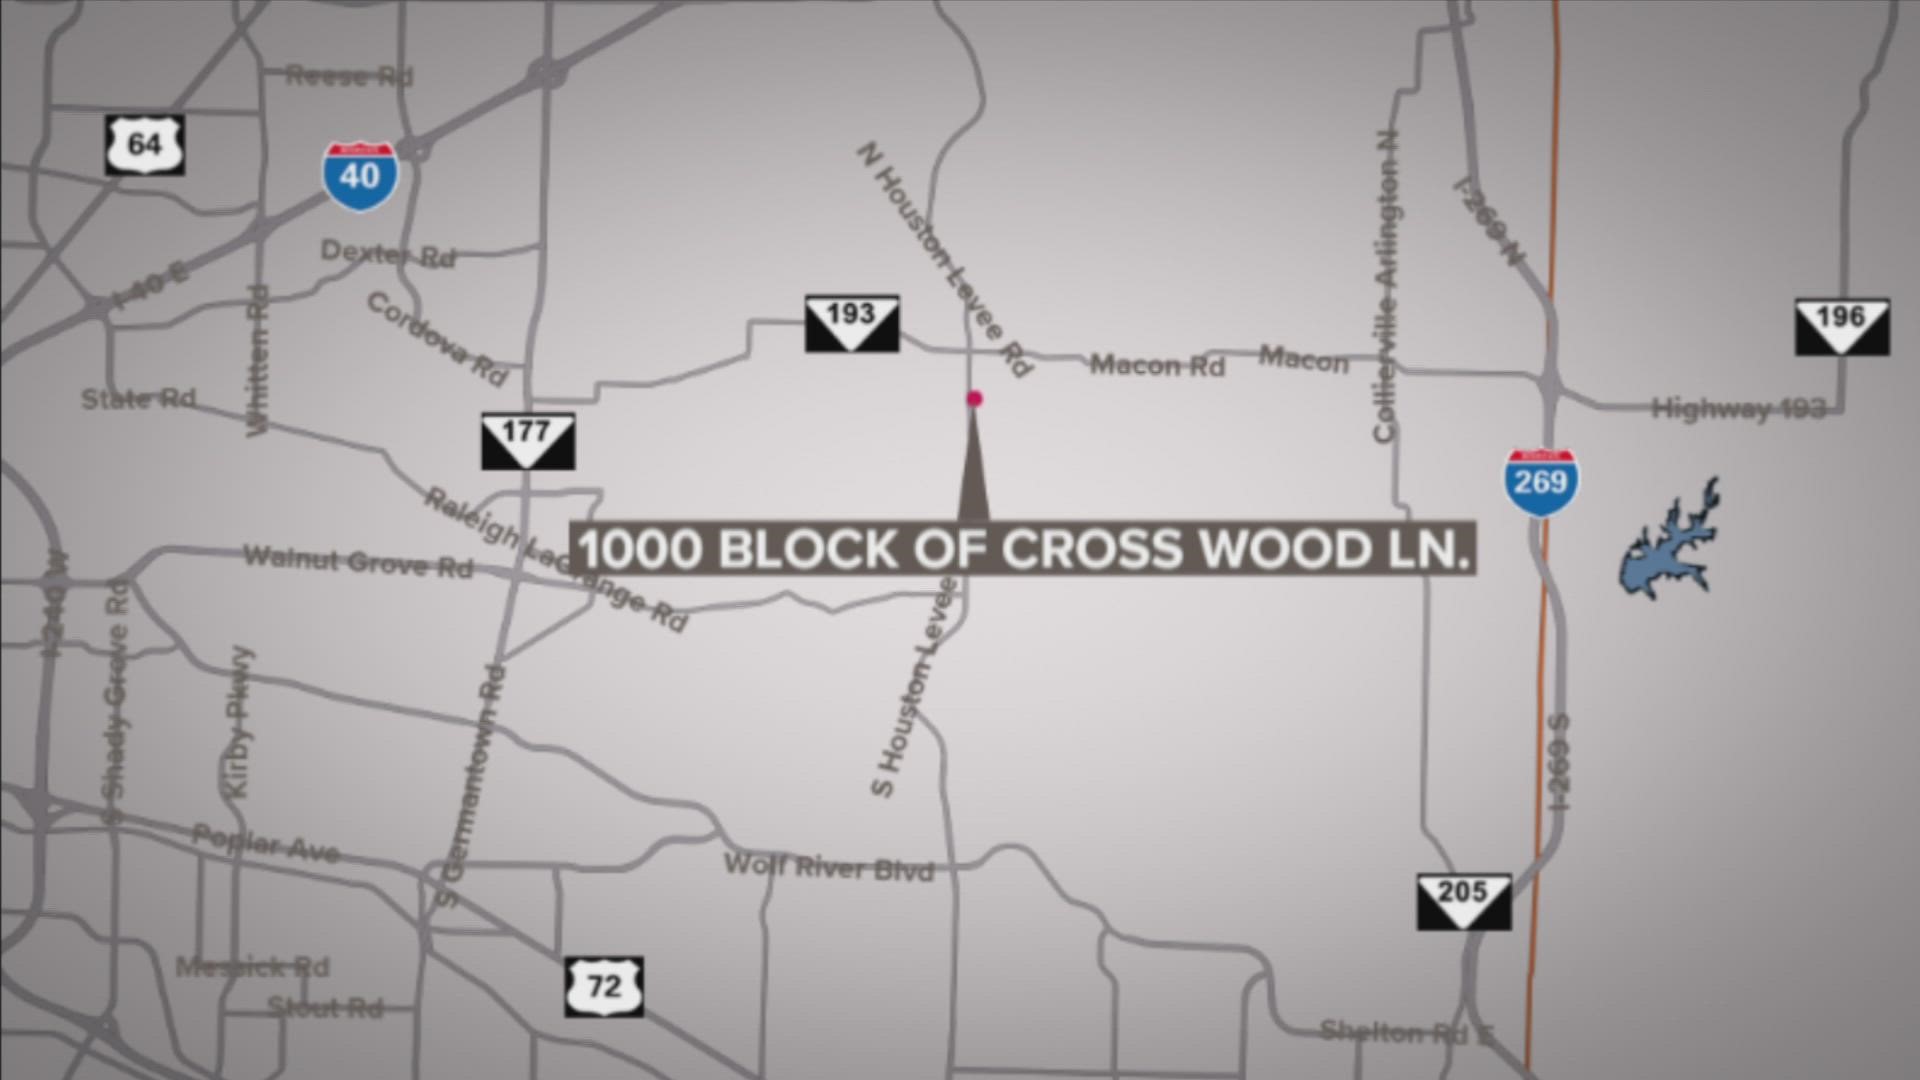 The incident occurred at the 1000 block of Cross Wood Lane Thursday, the Shelby County Sheriff's Office said.